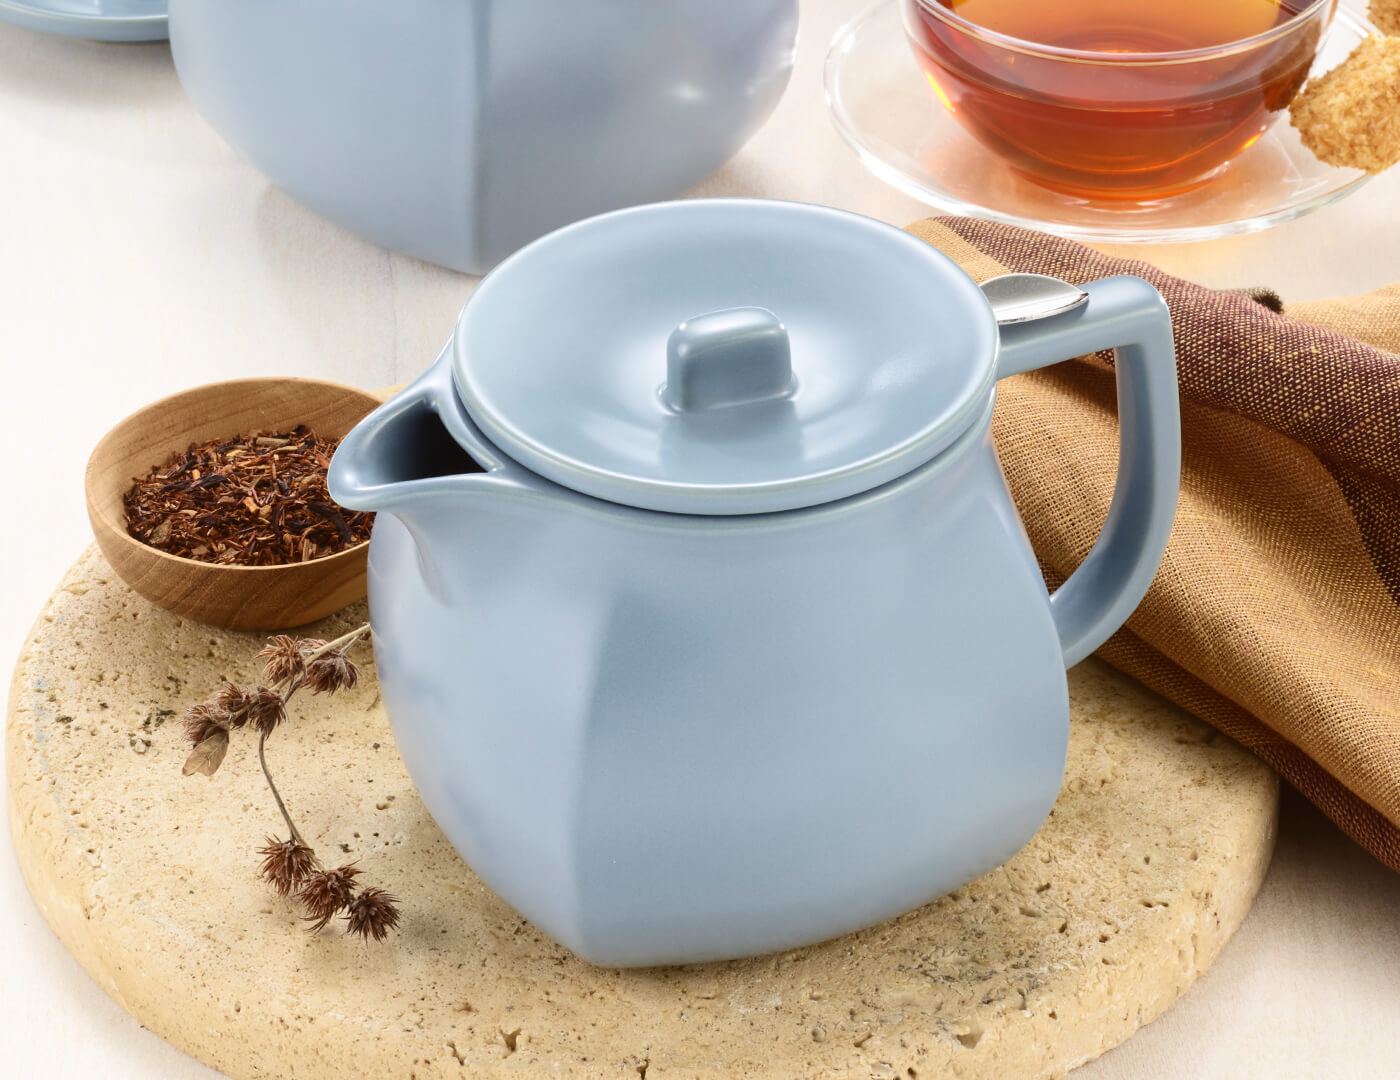 Fiore Stone Blue Teapot on a table with a small bowl of loose tea